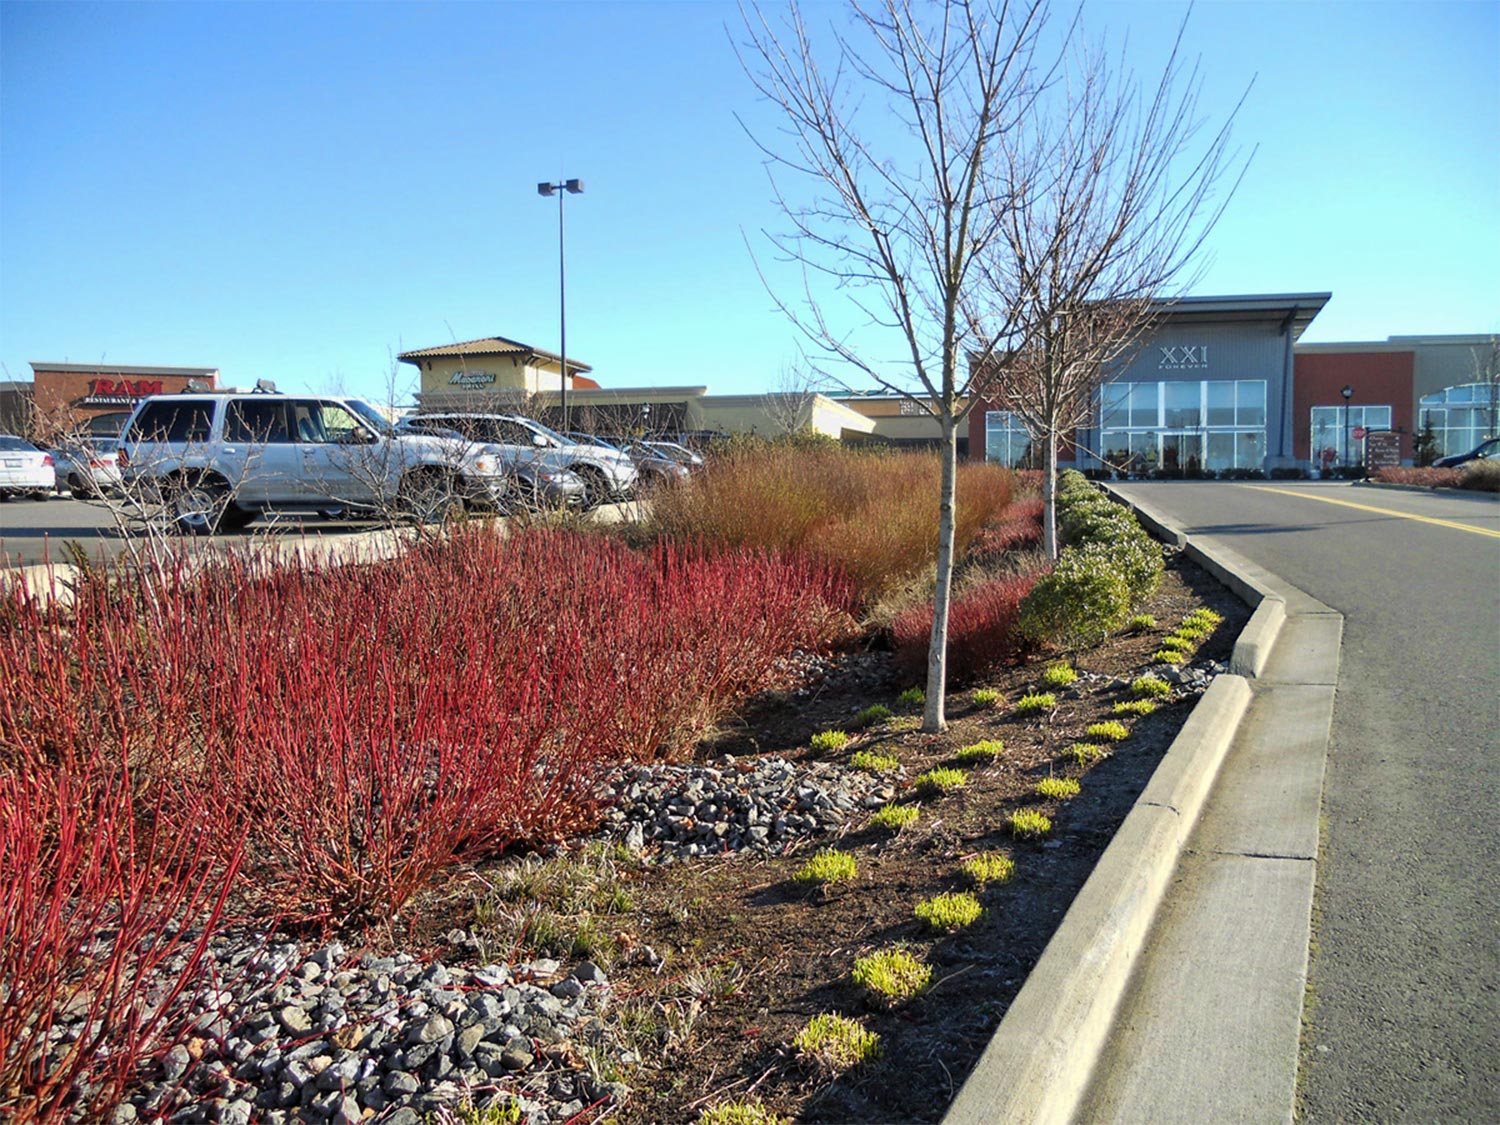 Shopping center parking lot with stormwater capture features